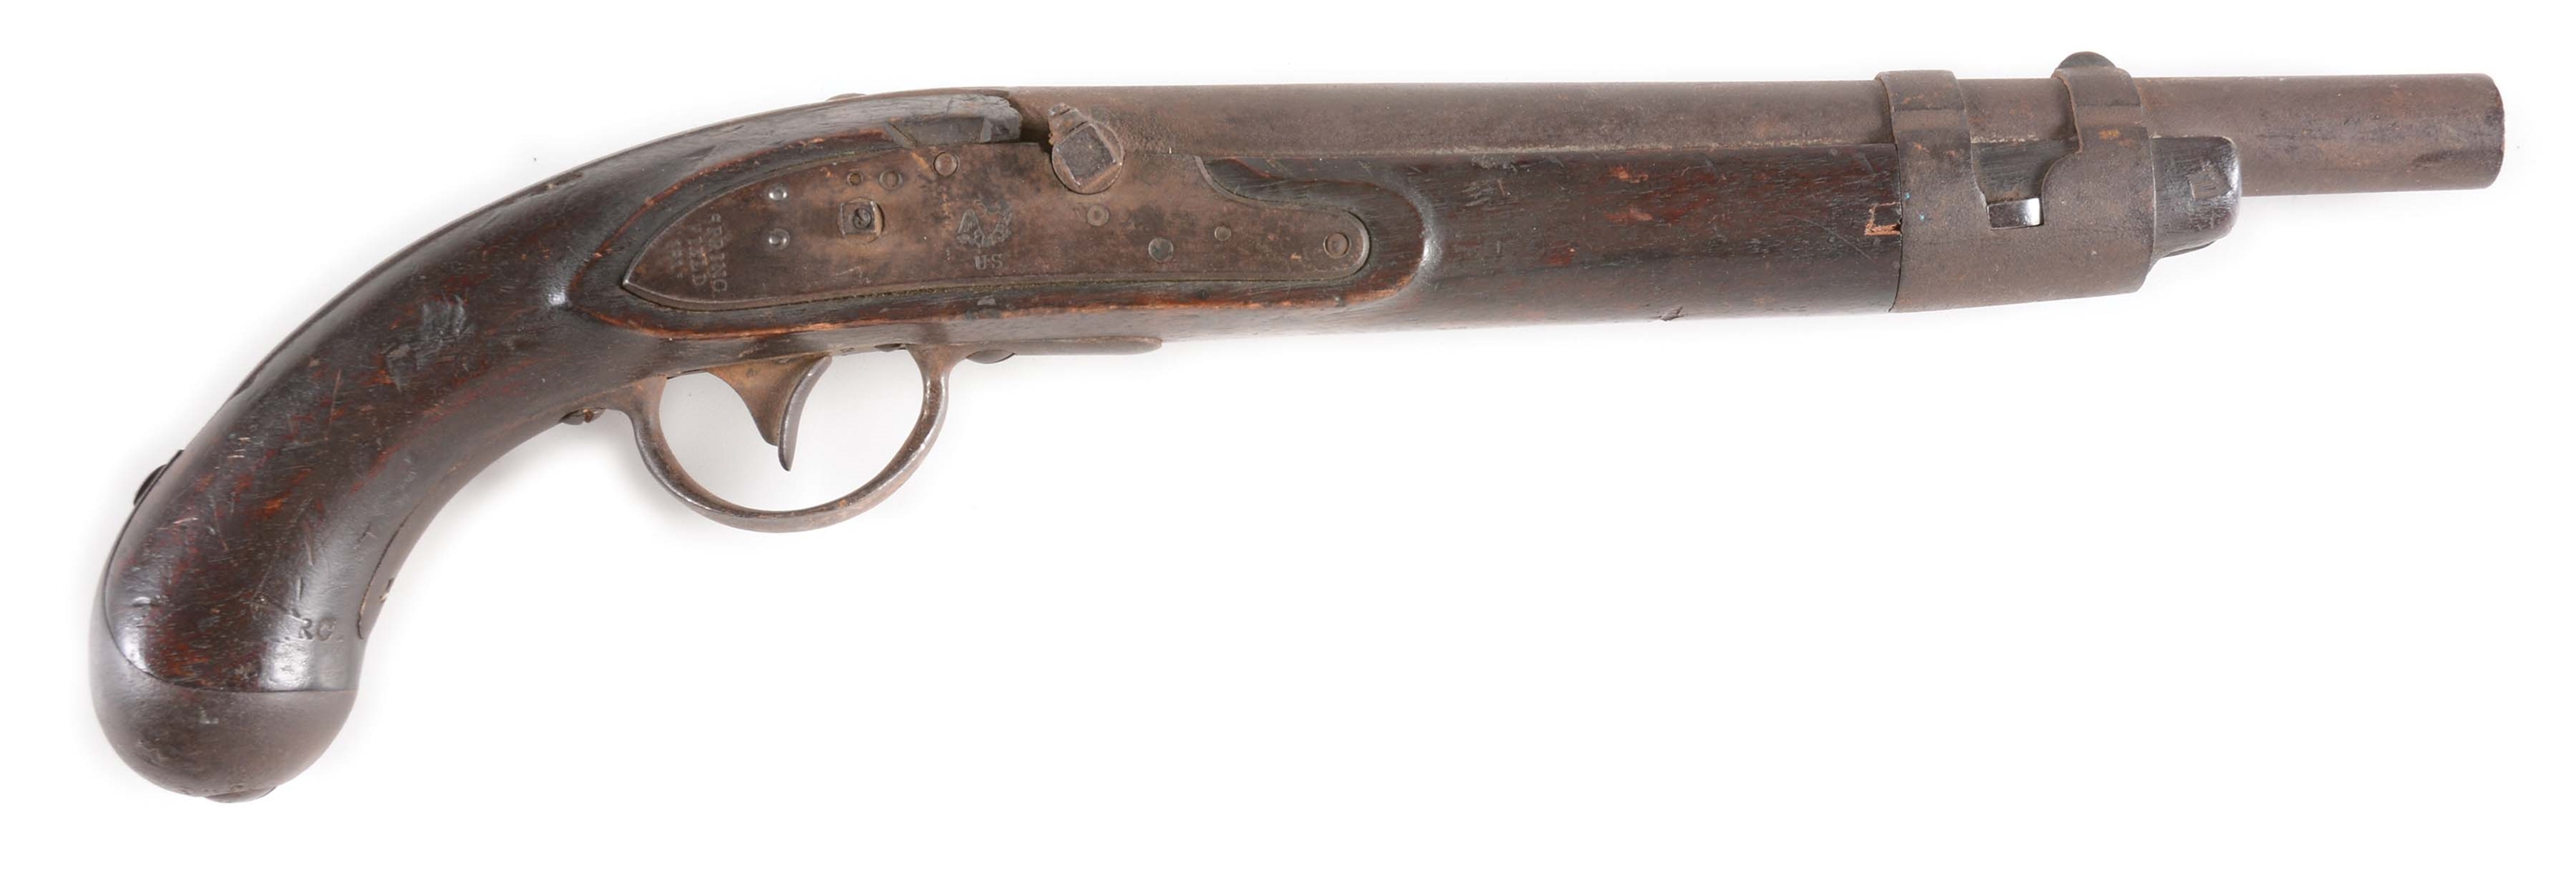 (A) SPRINGFIELD MODEL 1817 FLINTLOCK PISTOL DATED 1815, THE SECOND TYPE, CONVERTED TO PERCUSSION, IN UNTOUCHED ORIGINAL CONDITION THROUGHOUT.